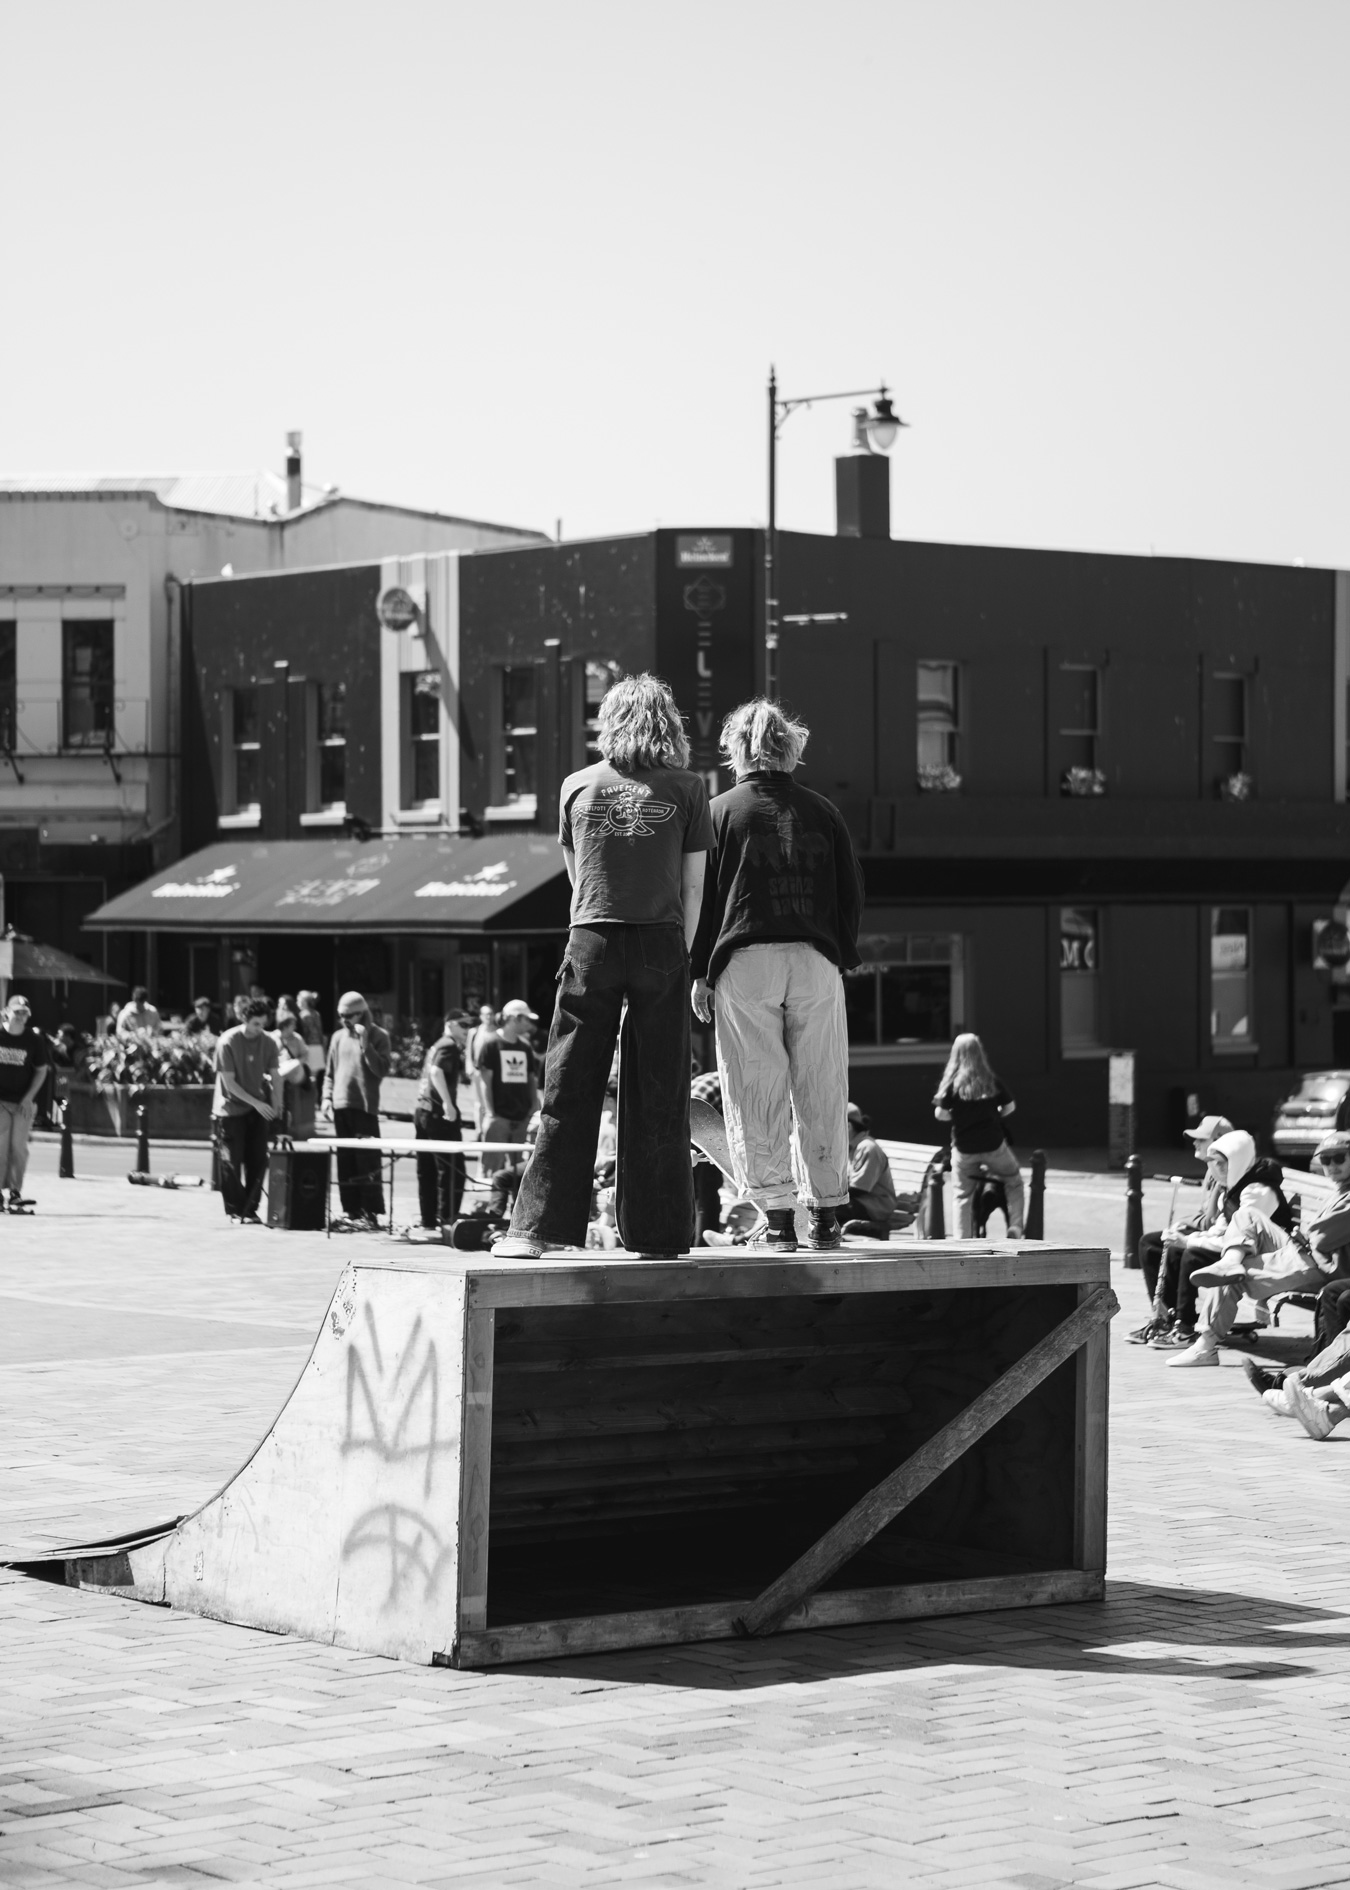 Two people standing on the platform of a skateboard quarter pipe.